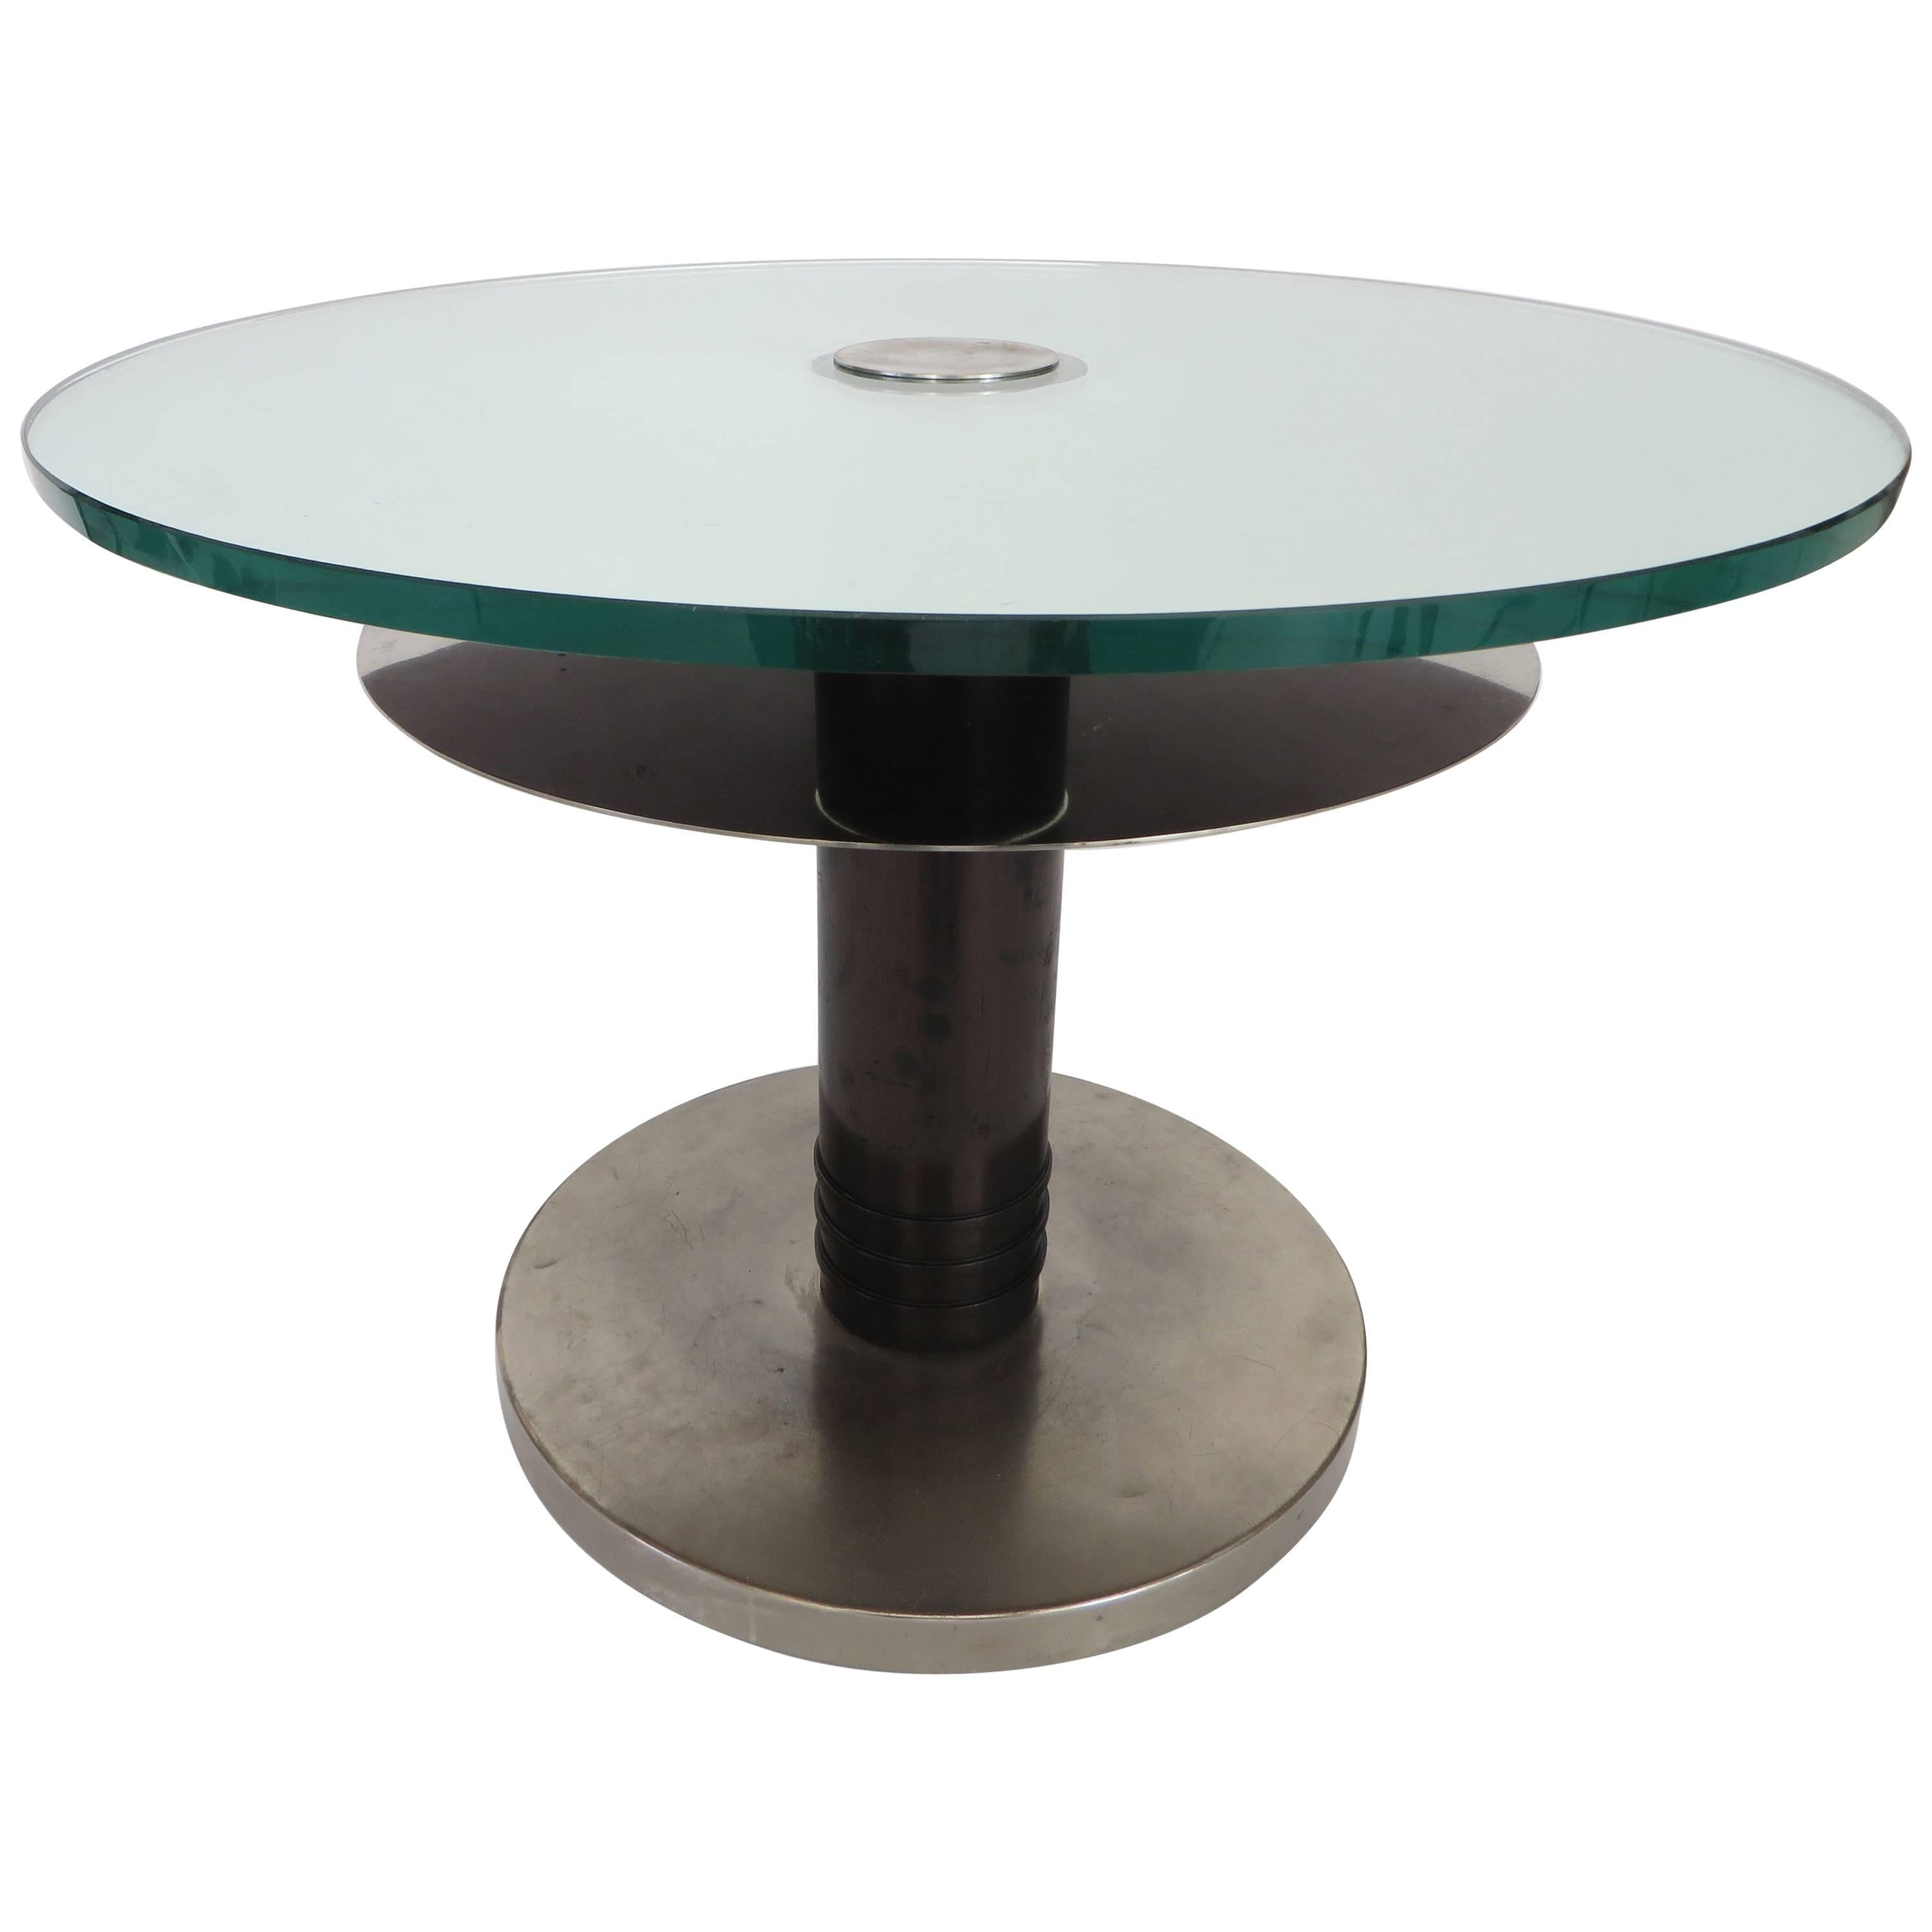 Axel Einar Hjorth Typenko Occasional Table